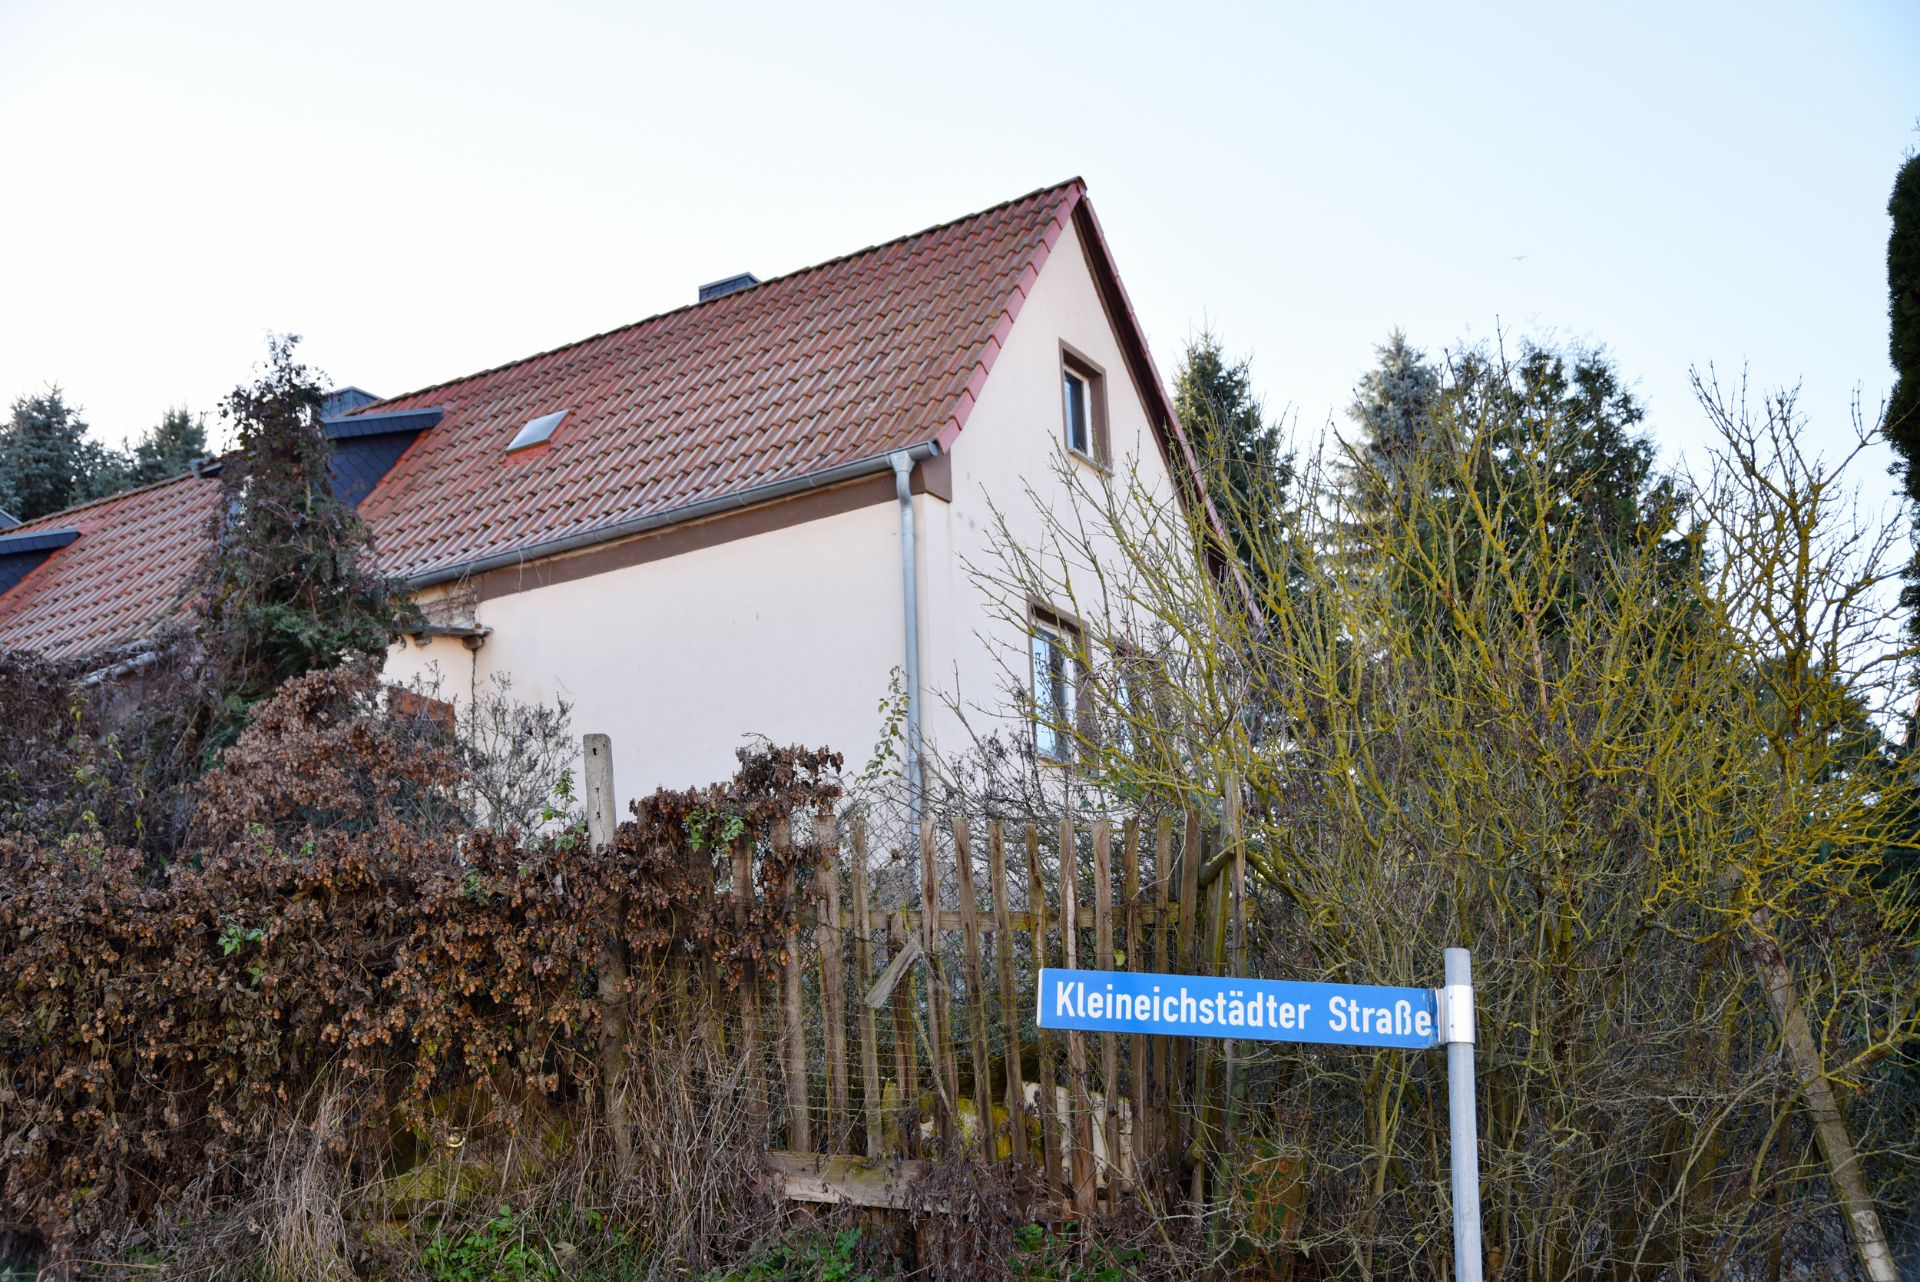 LARGE FREEHOLD HOUSE AND LAND IN SAXONY-ANHALT, GERMANY - Image 12 of 60